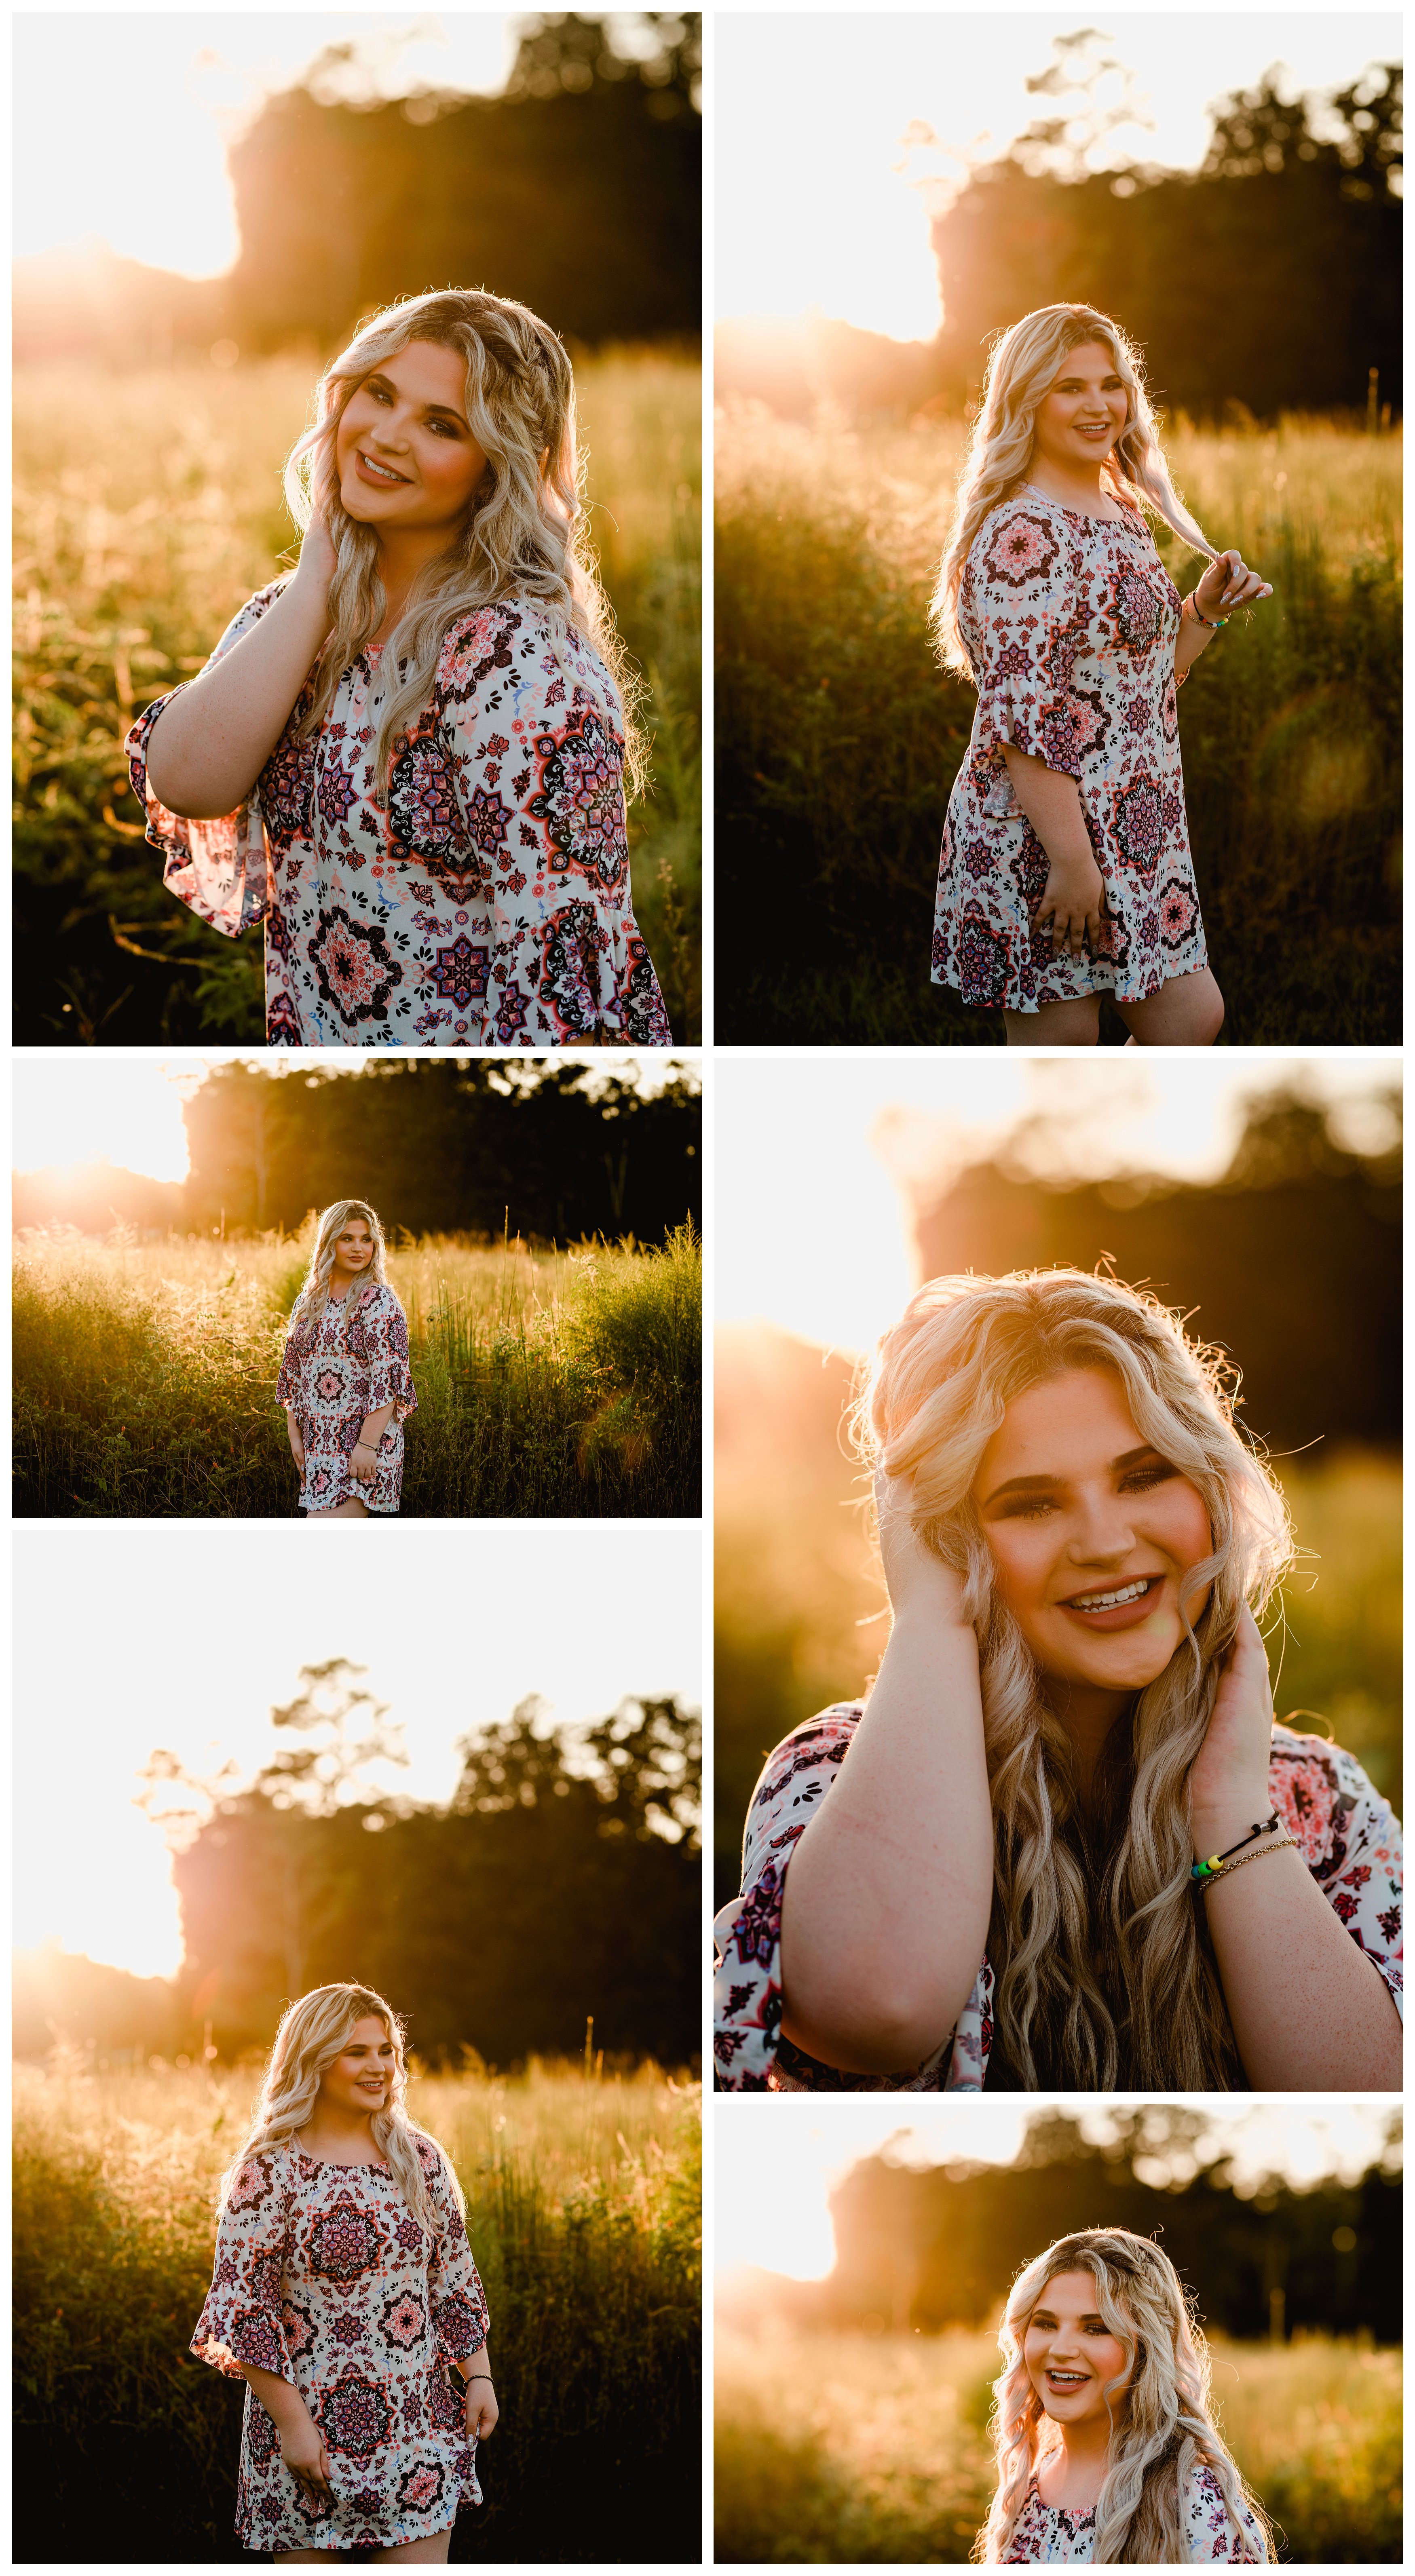 How to pose a senior in an open field during the golden hour by professional senior photographer in Florida.